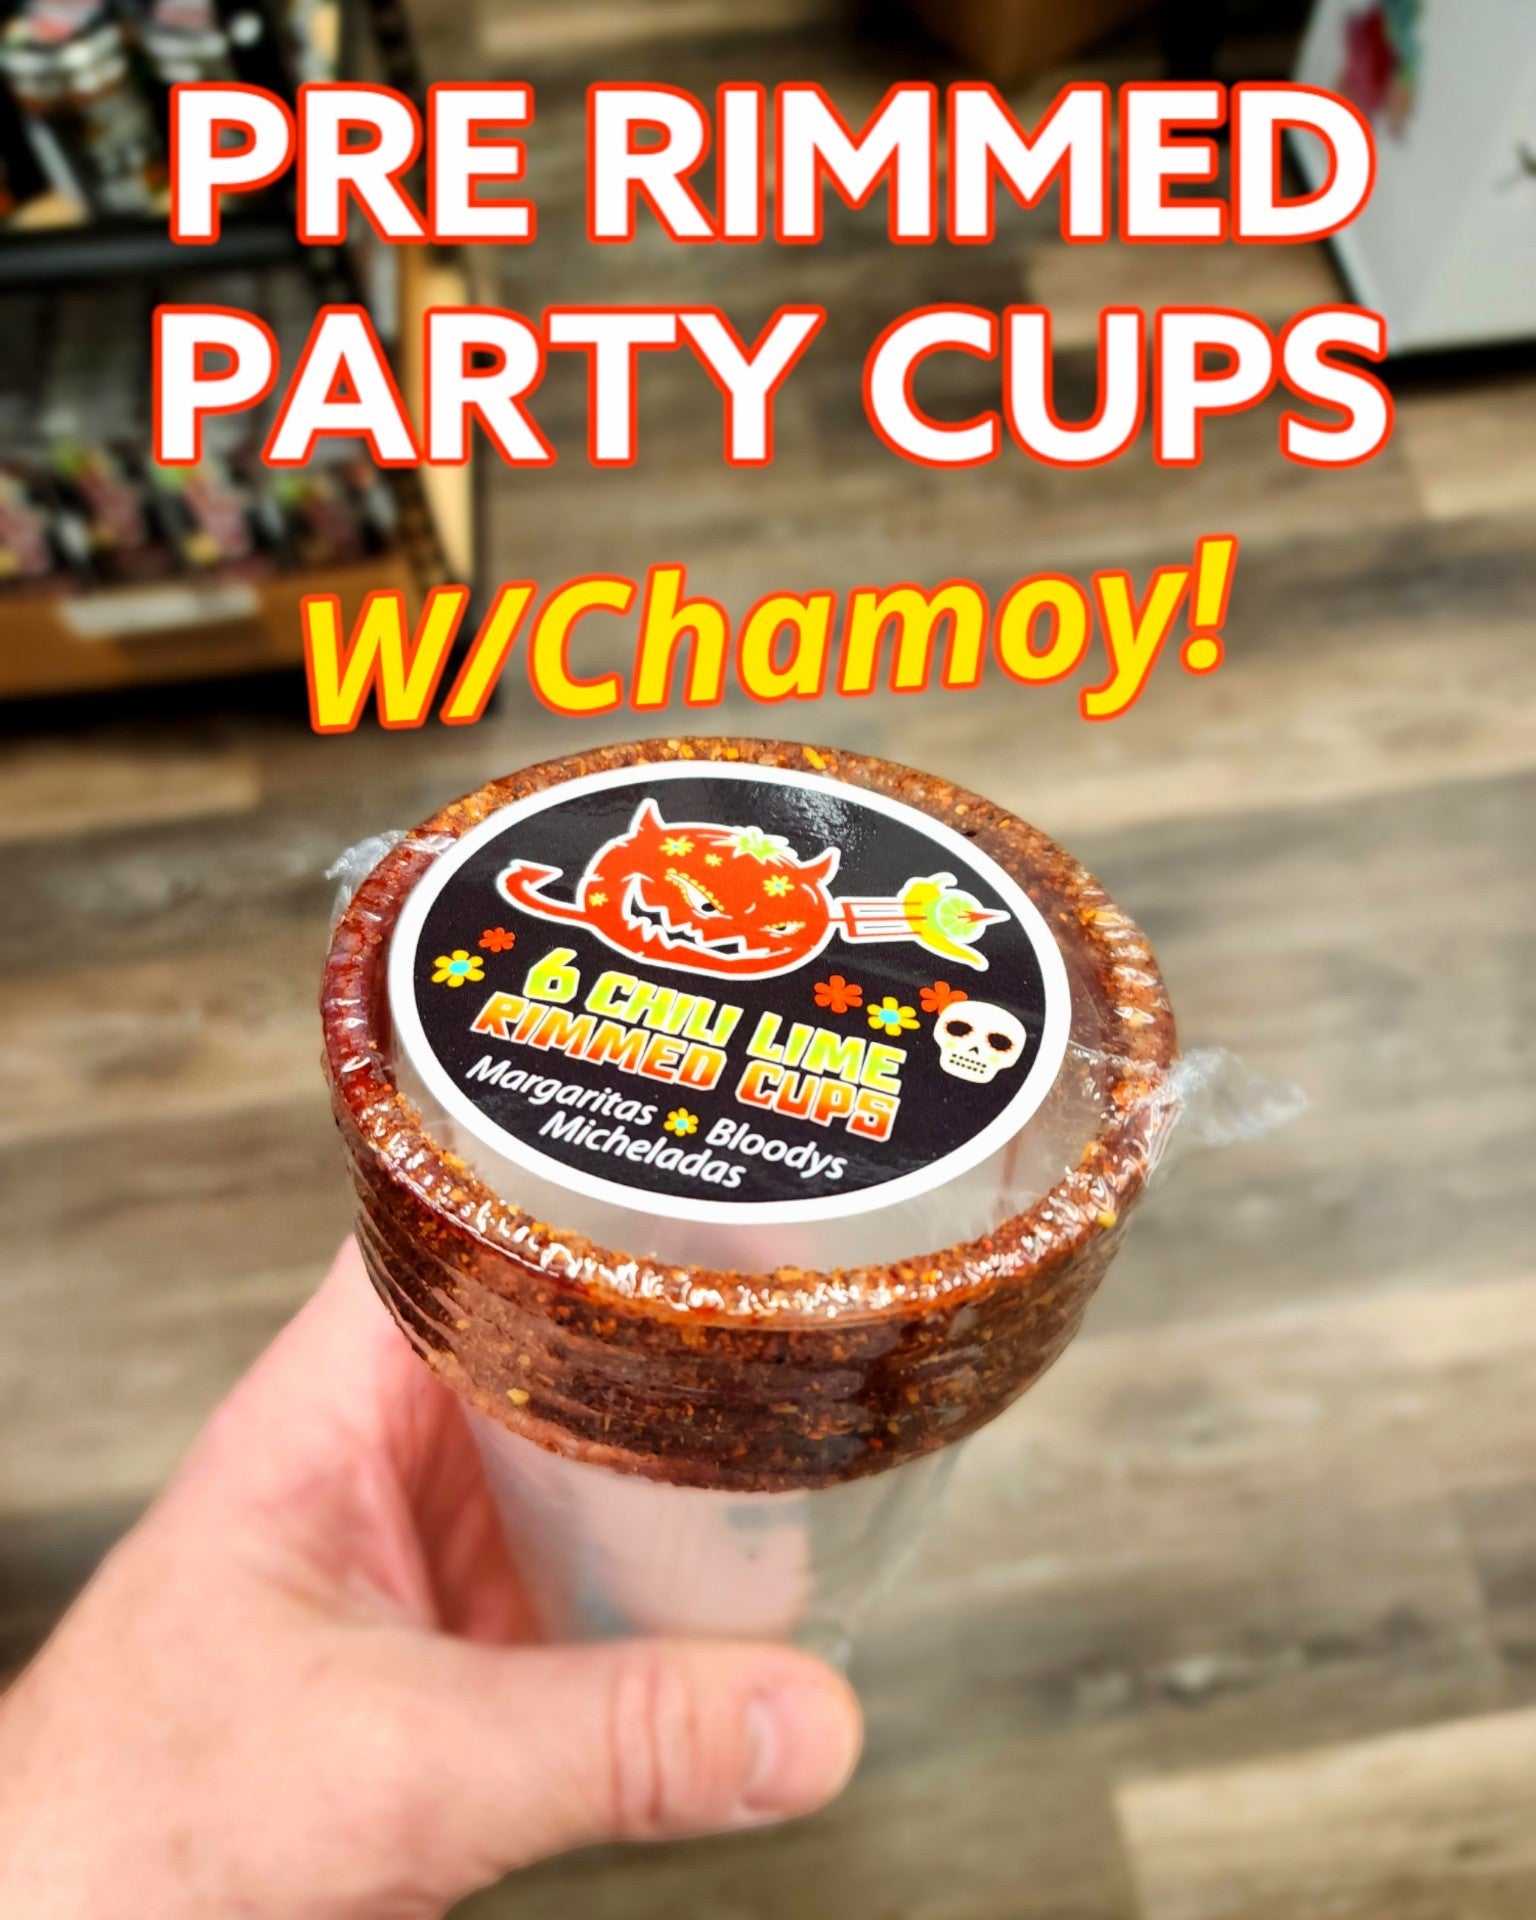 Chamoy rimmed party cups